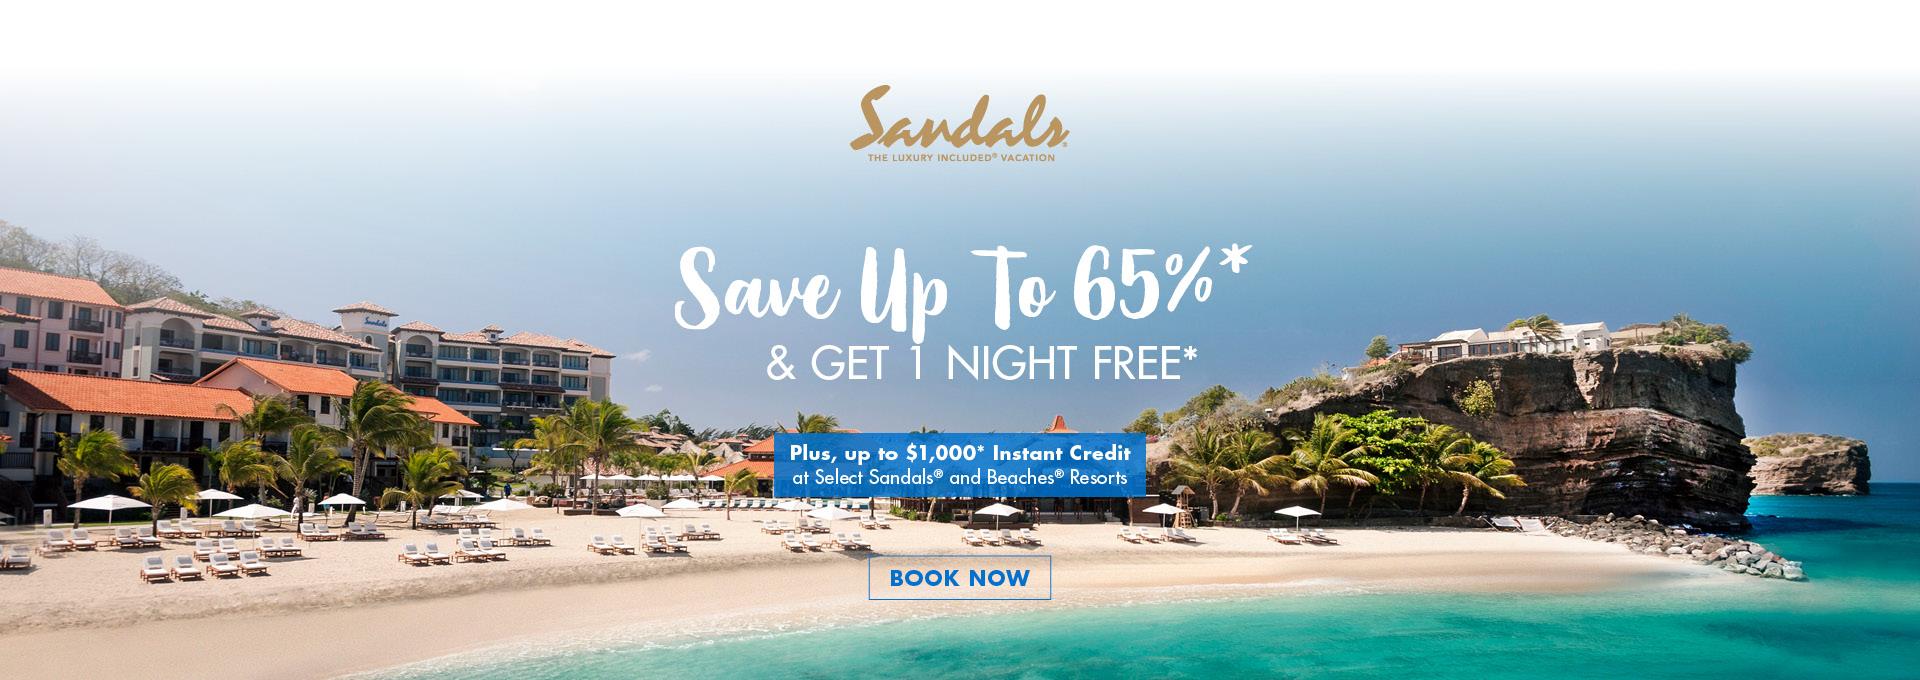 Save up to 65% at Sandals Resorts